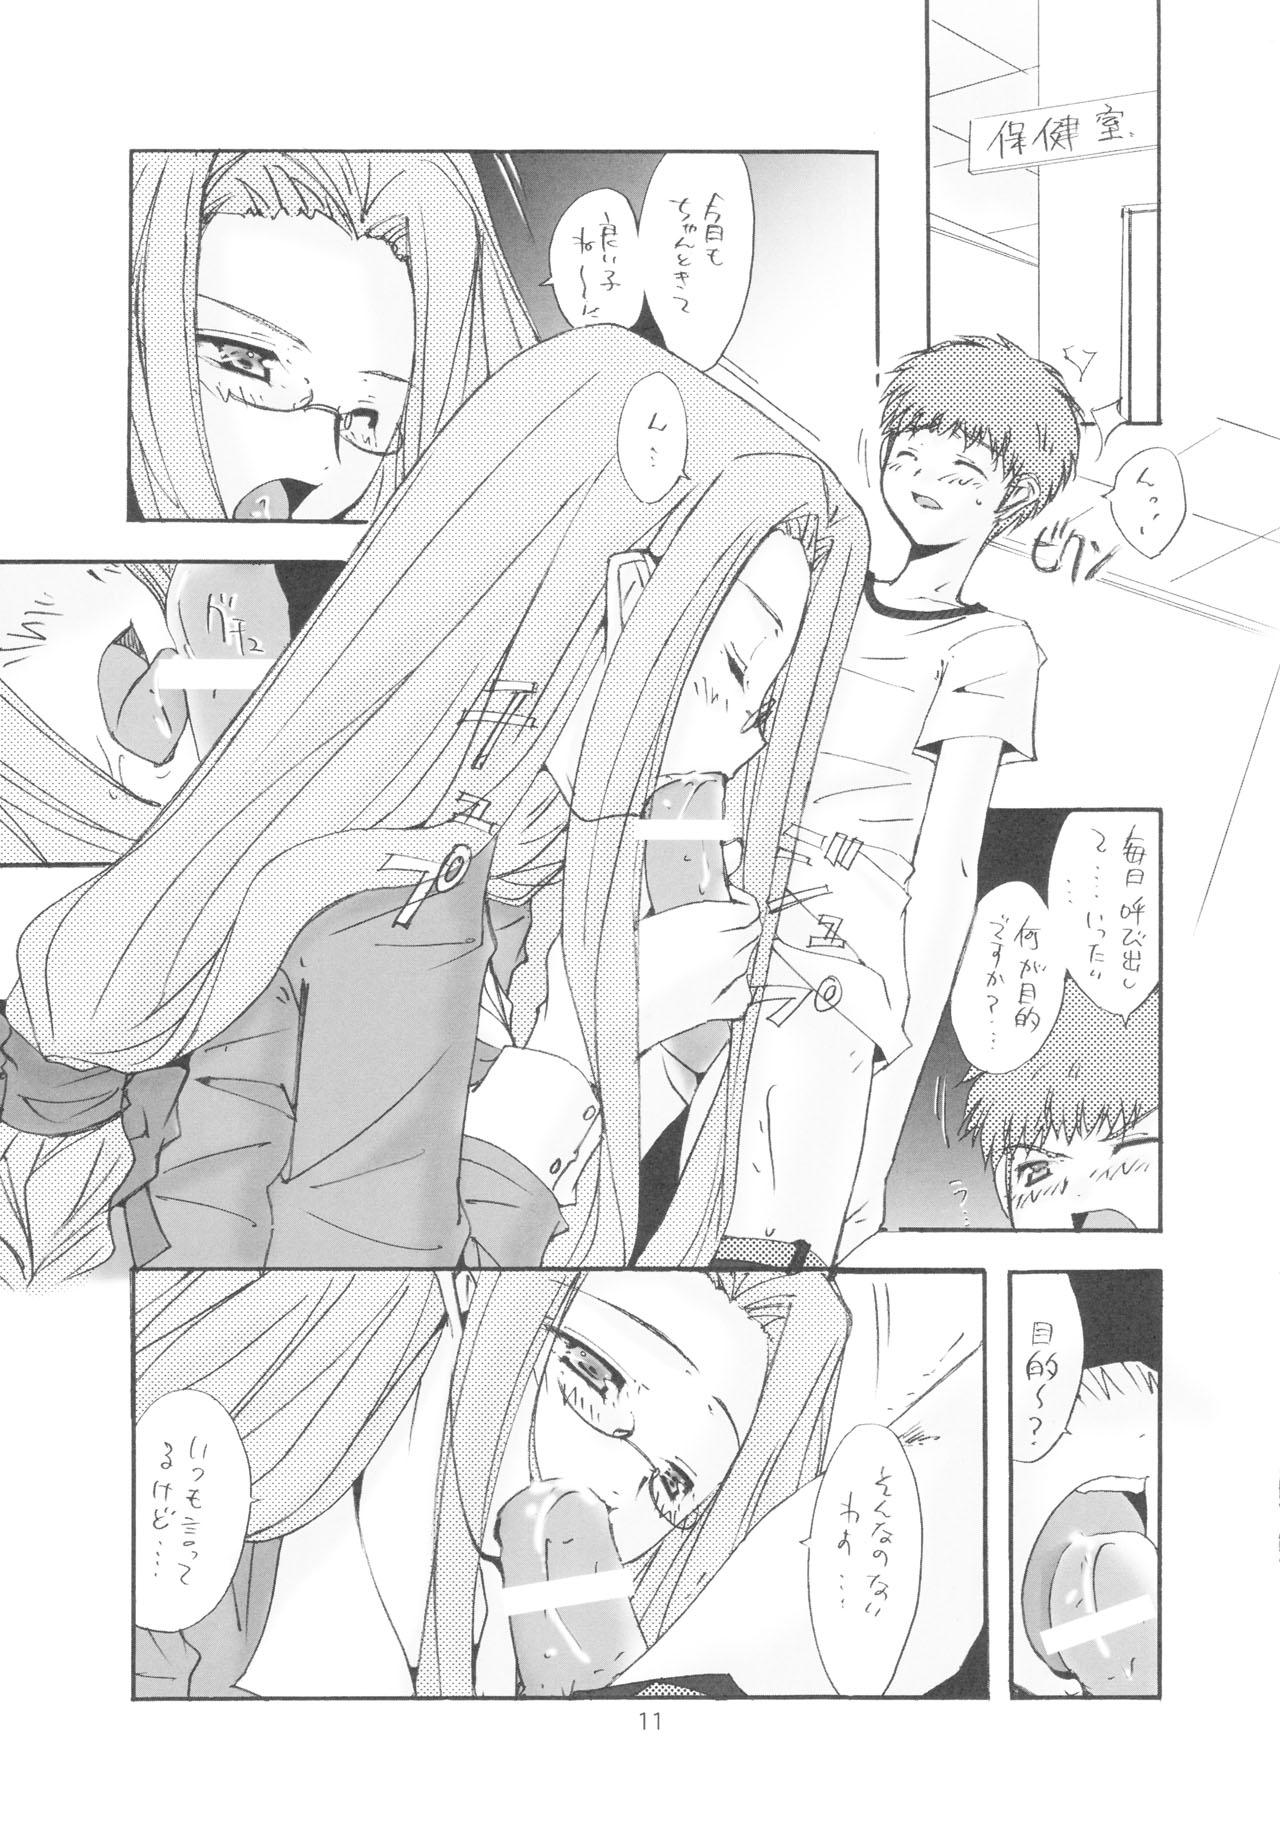 Sloppy Blowjob PURPLE DIGNITY - Fate stay night Amateurs - Page 8